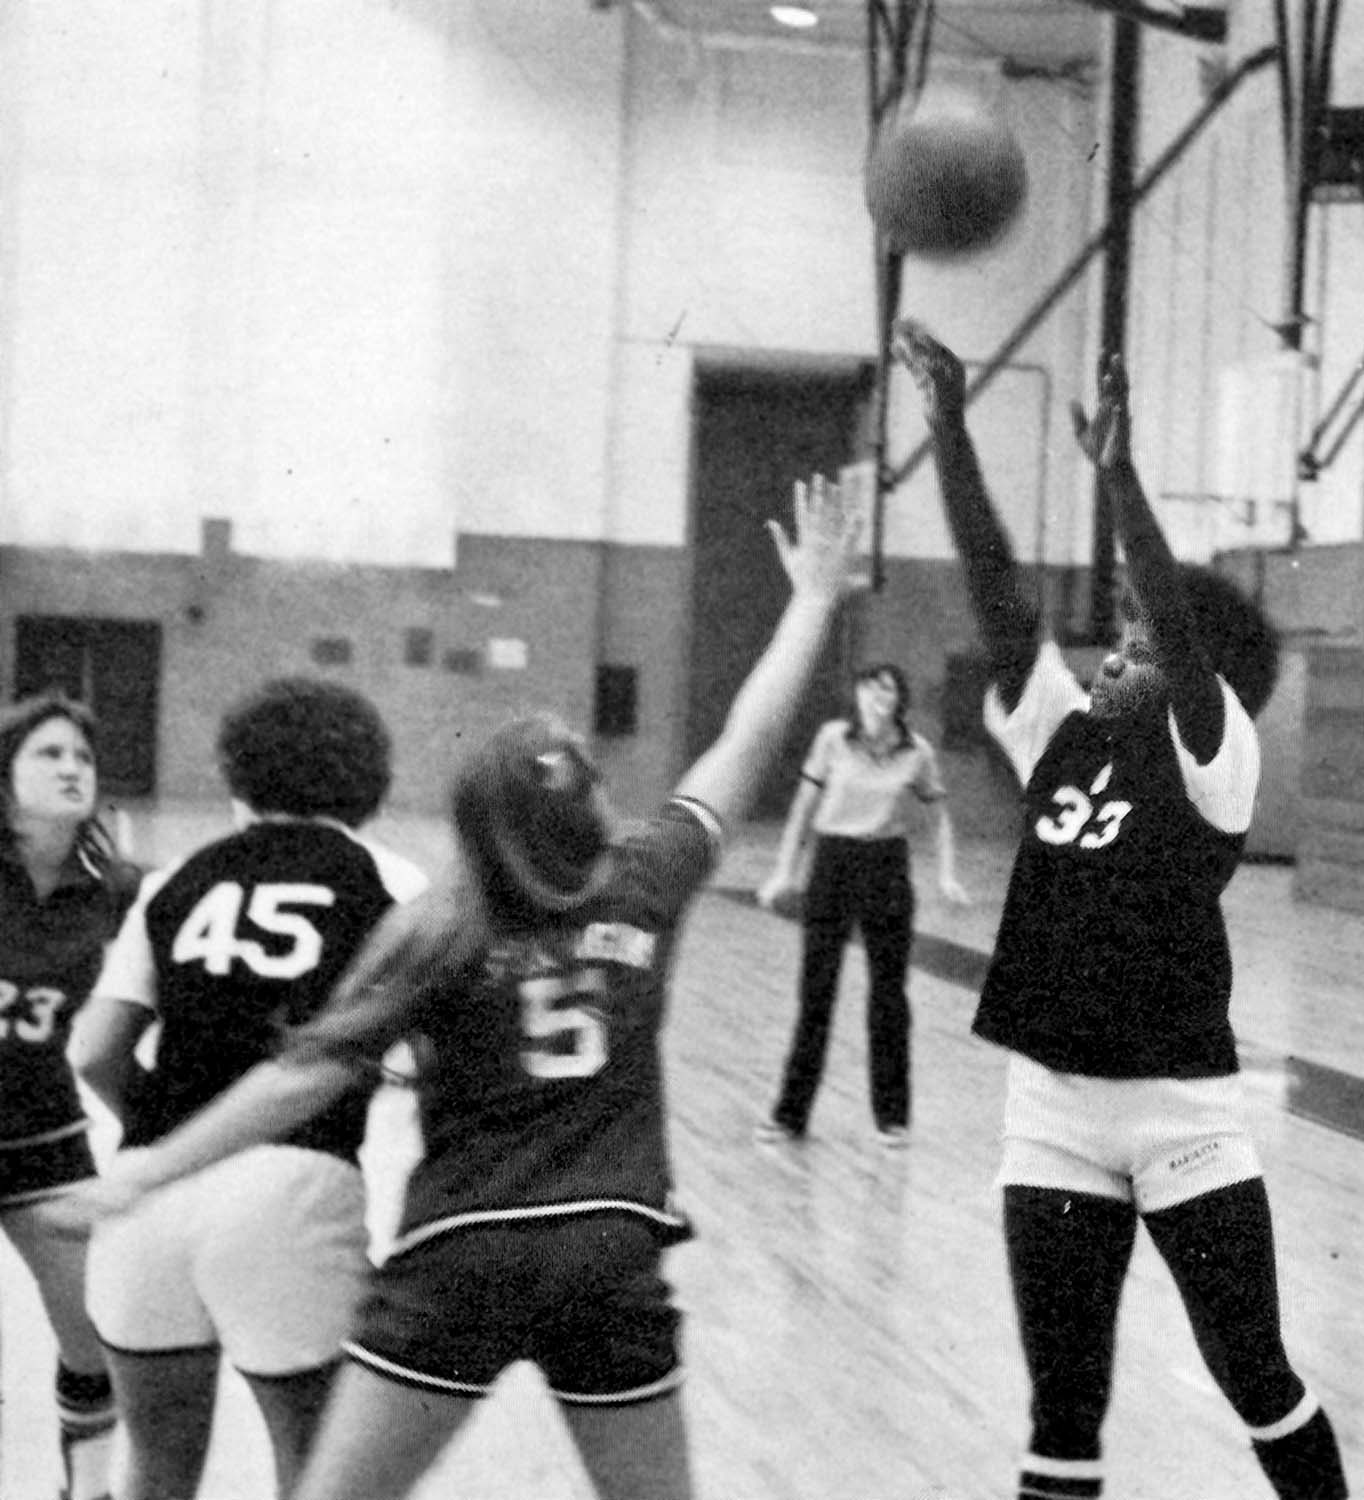 Women's basketball at Marietta College in the 1970s